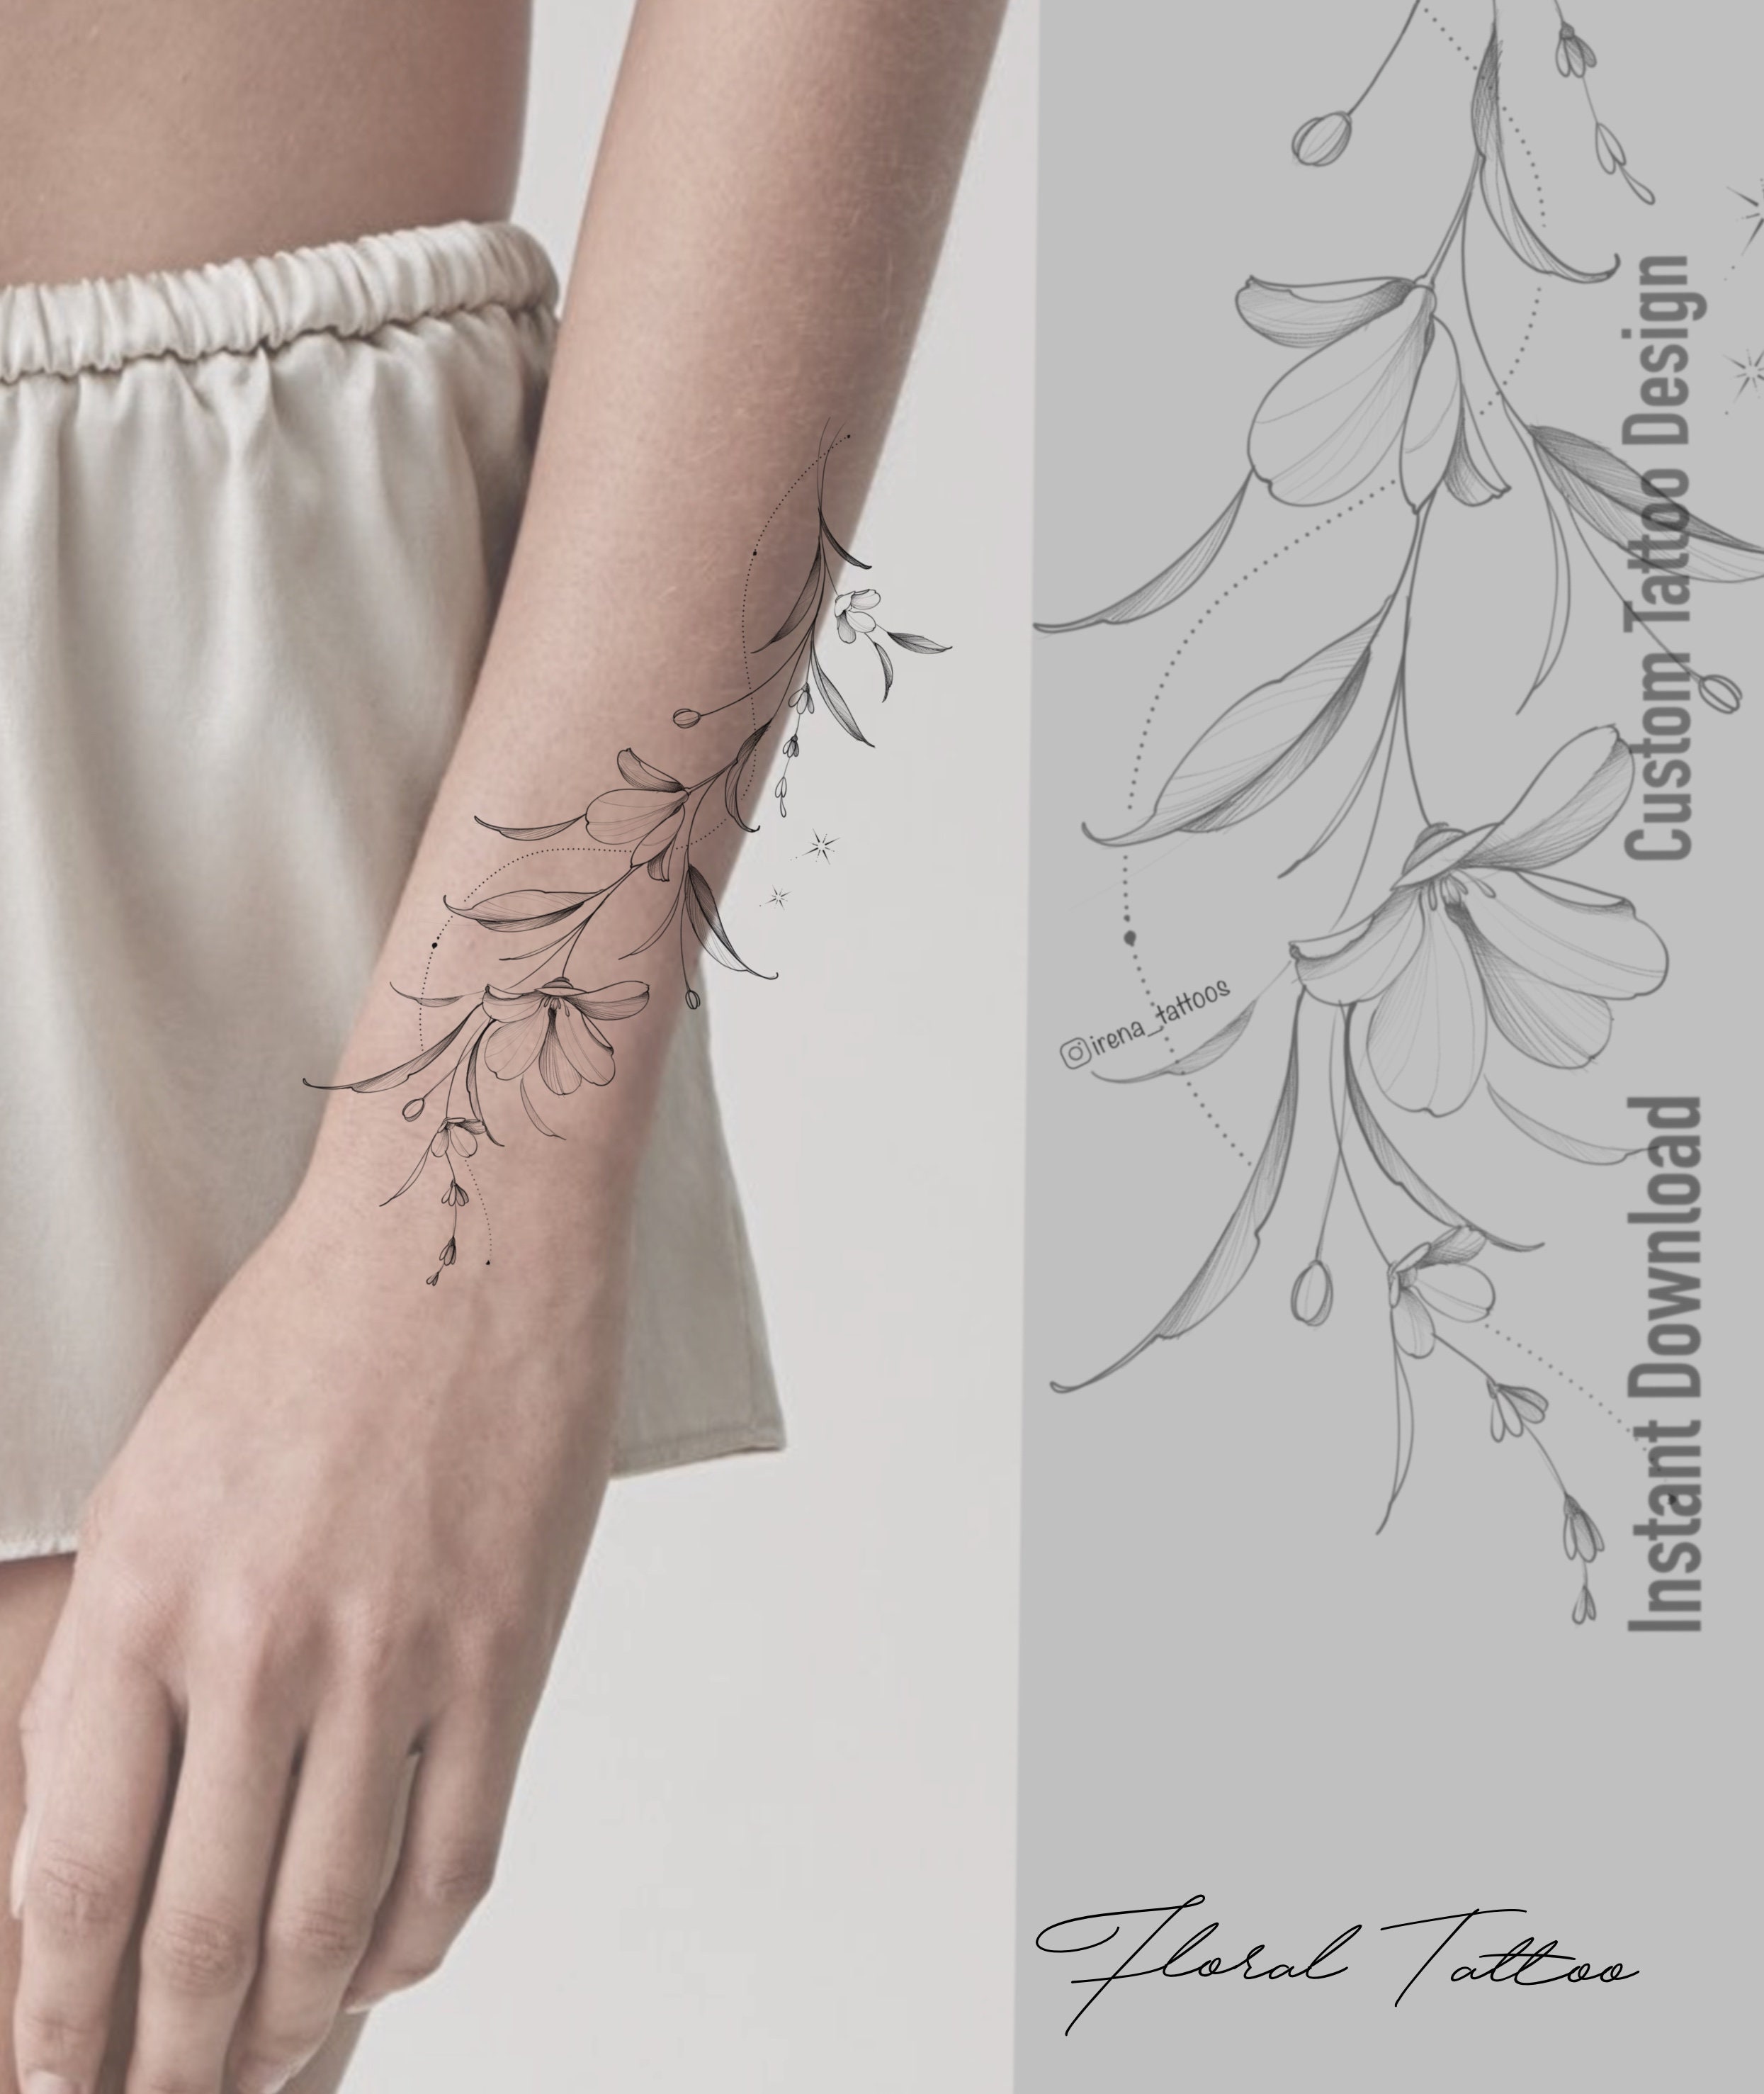 20 Sheets Of Cool Skull Forest Fish Temporary Arm Tattoo For Men And Women  Full Arm, Leg, Shoulder Sleeve Sleeves Body Art Totem 230517 From Mu09,  $27.3 | DHgate.Com